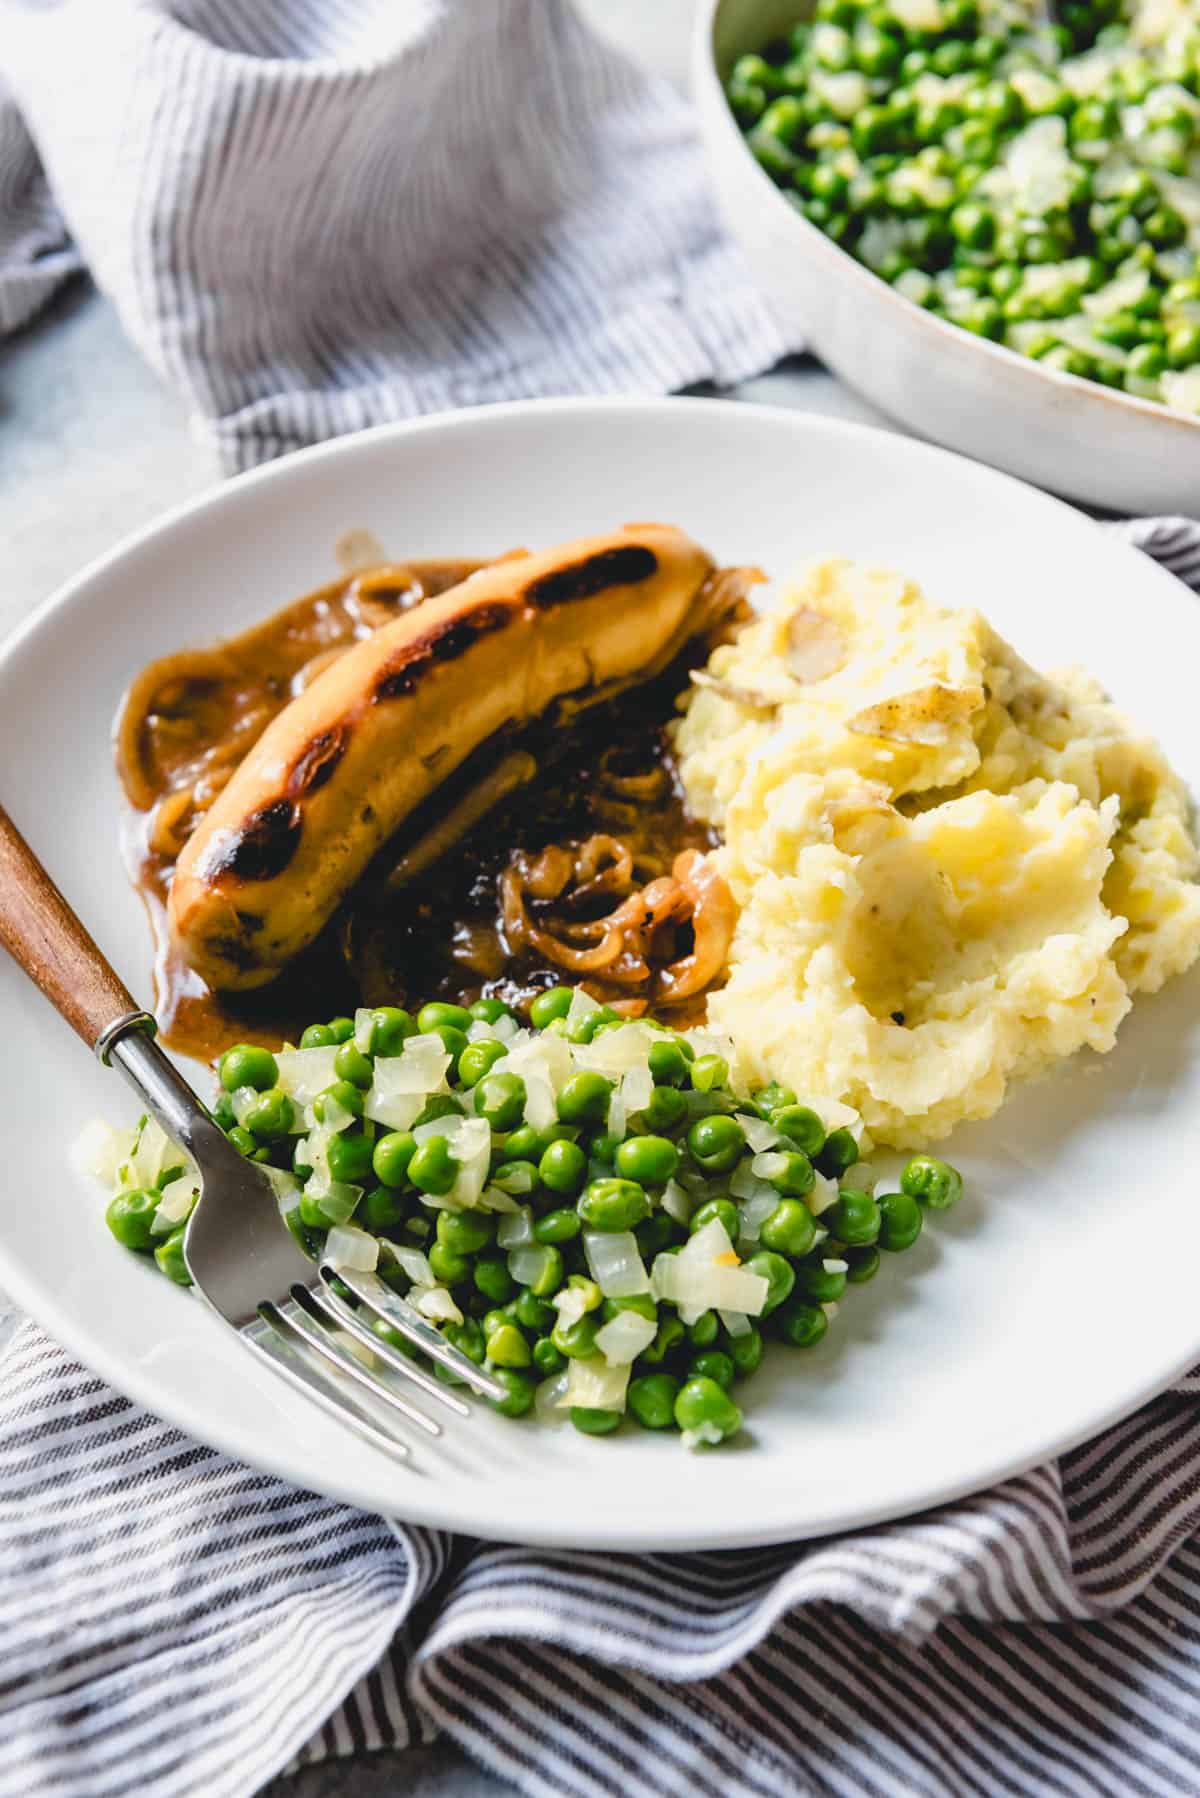 An image of peas with bangers and mash.